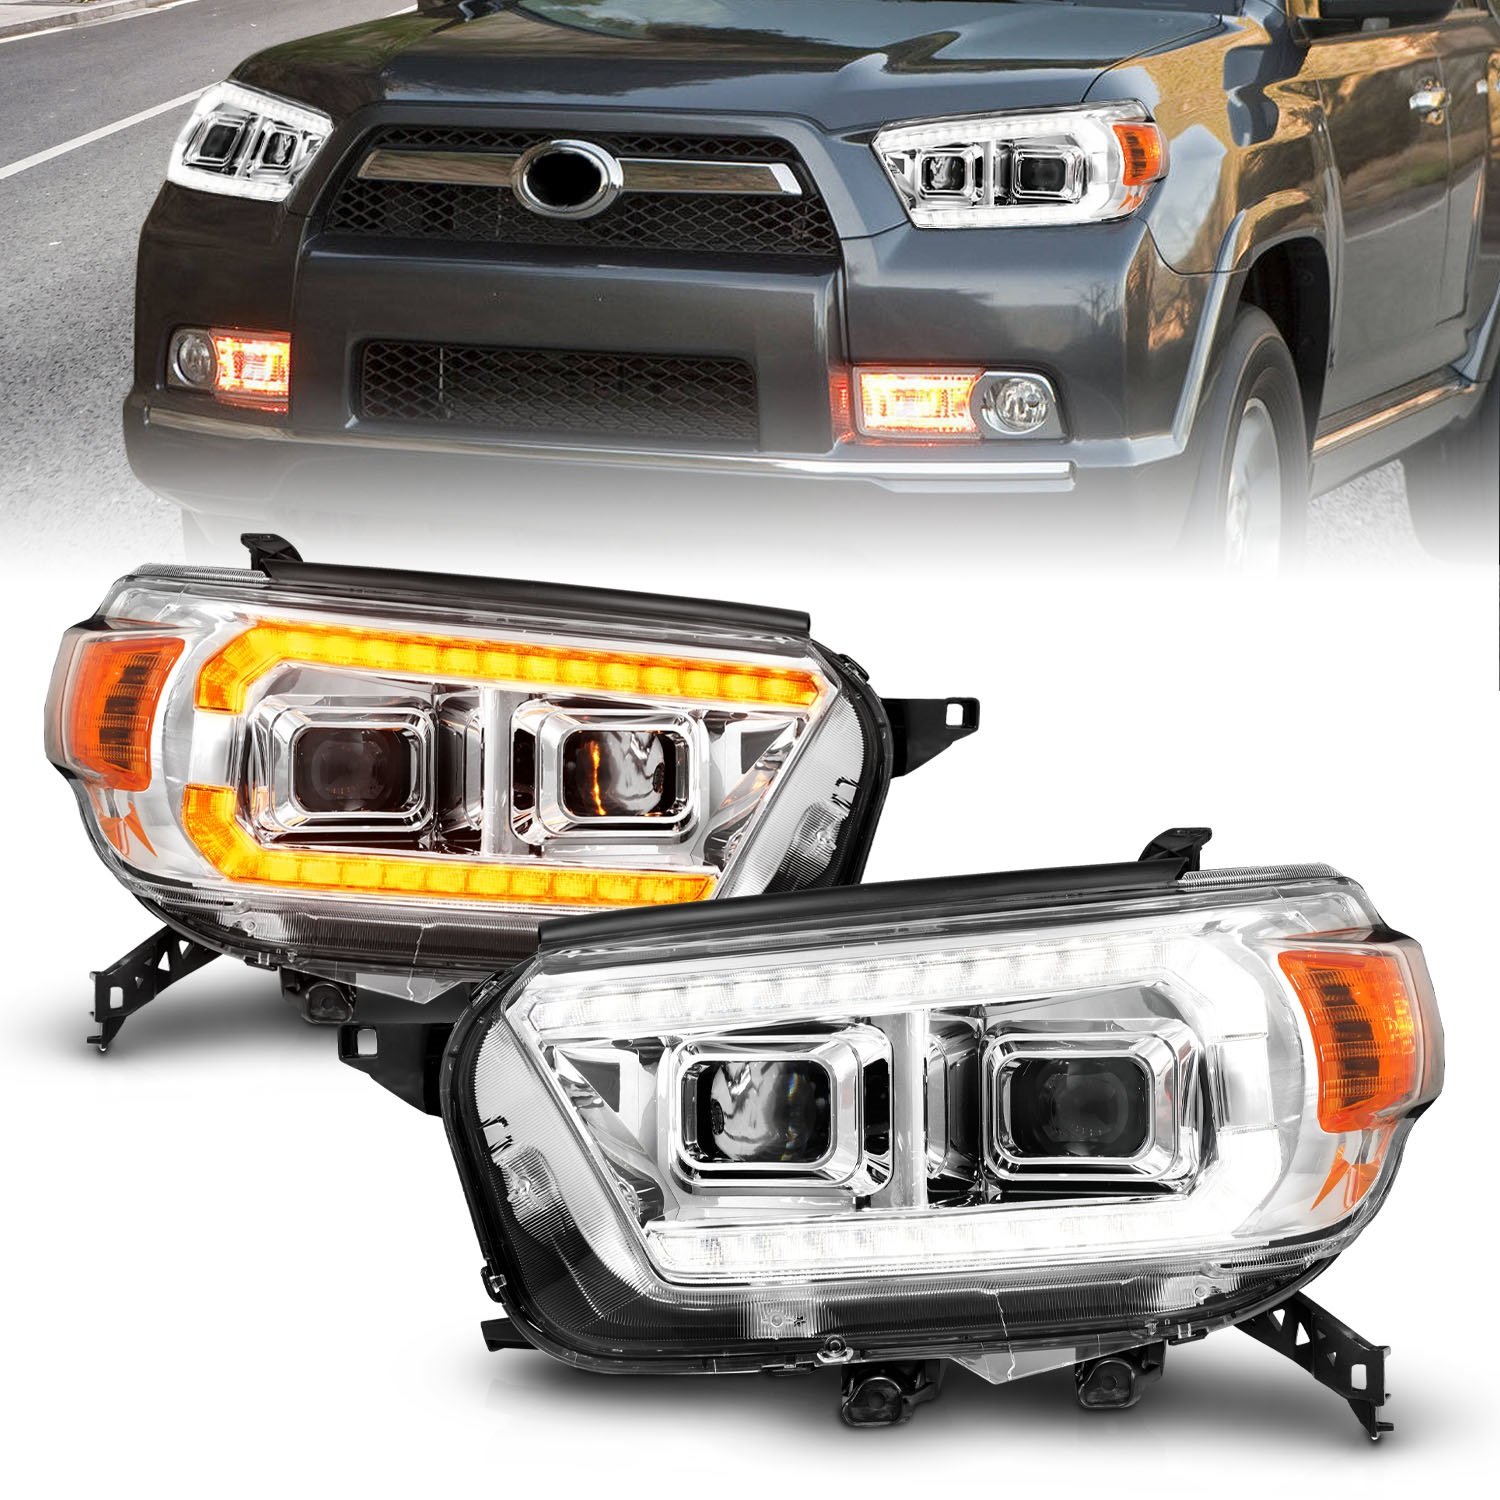 111603 Projector Plank Style Headlights w/Sequential Turn Signals and DRLs for 2010-2013 Toyota 4Runner [Chrome Housings]